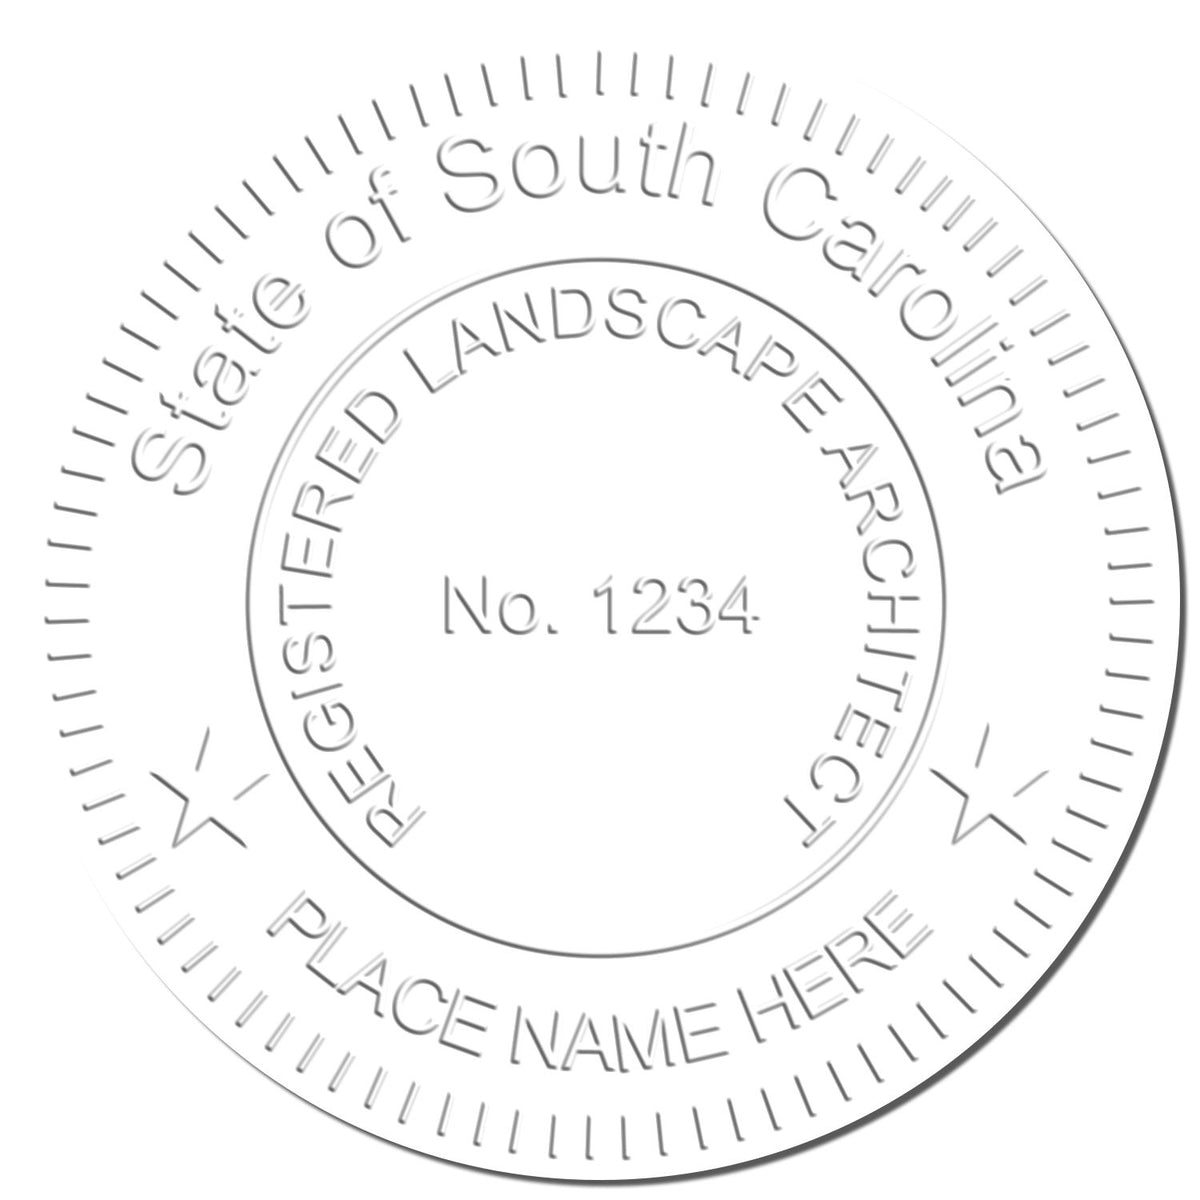 This paper is stamped with a sample imprint of the Soft Pocket South Carolina Landscape Architect Embosser, signifying its quality and reliability.